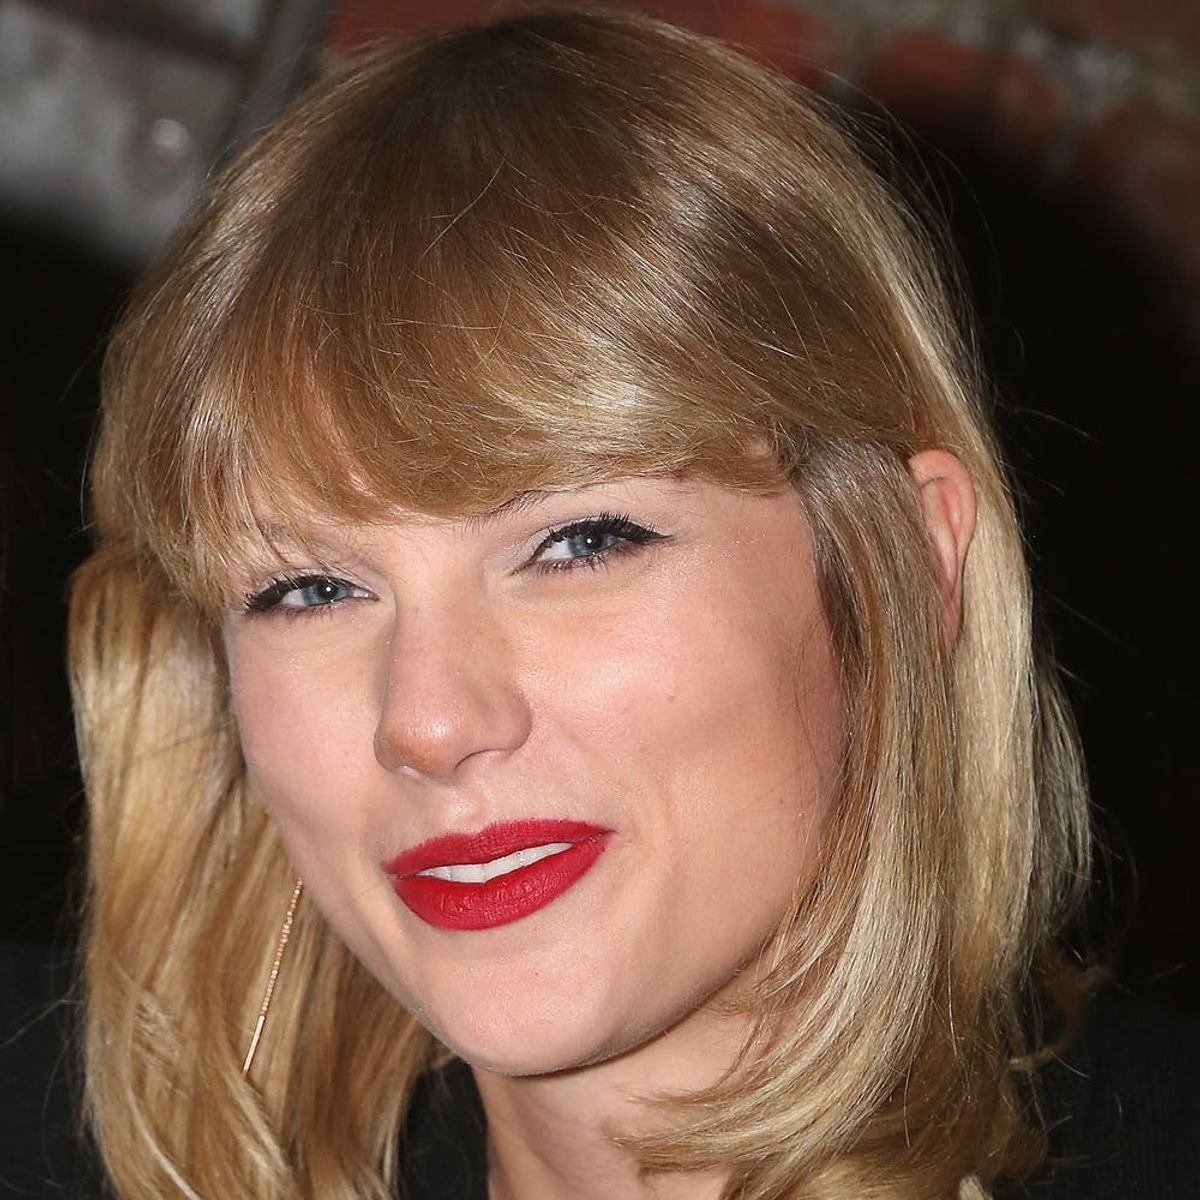 Taylor Swift’s Reasoning for Calling Out Her Video Co-Star Zayn Malik Will Make You LOL